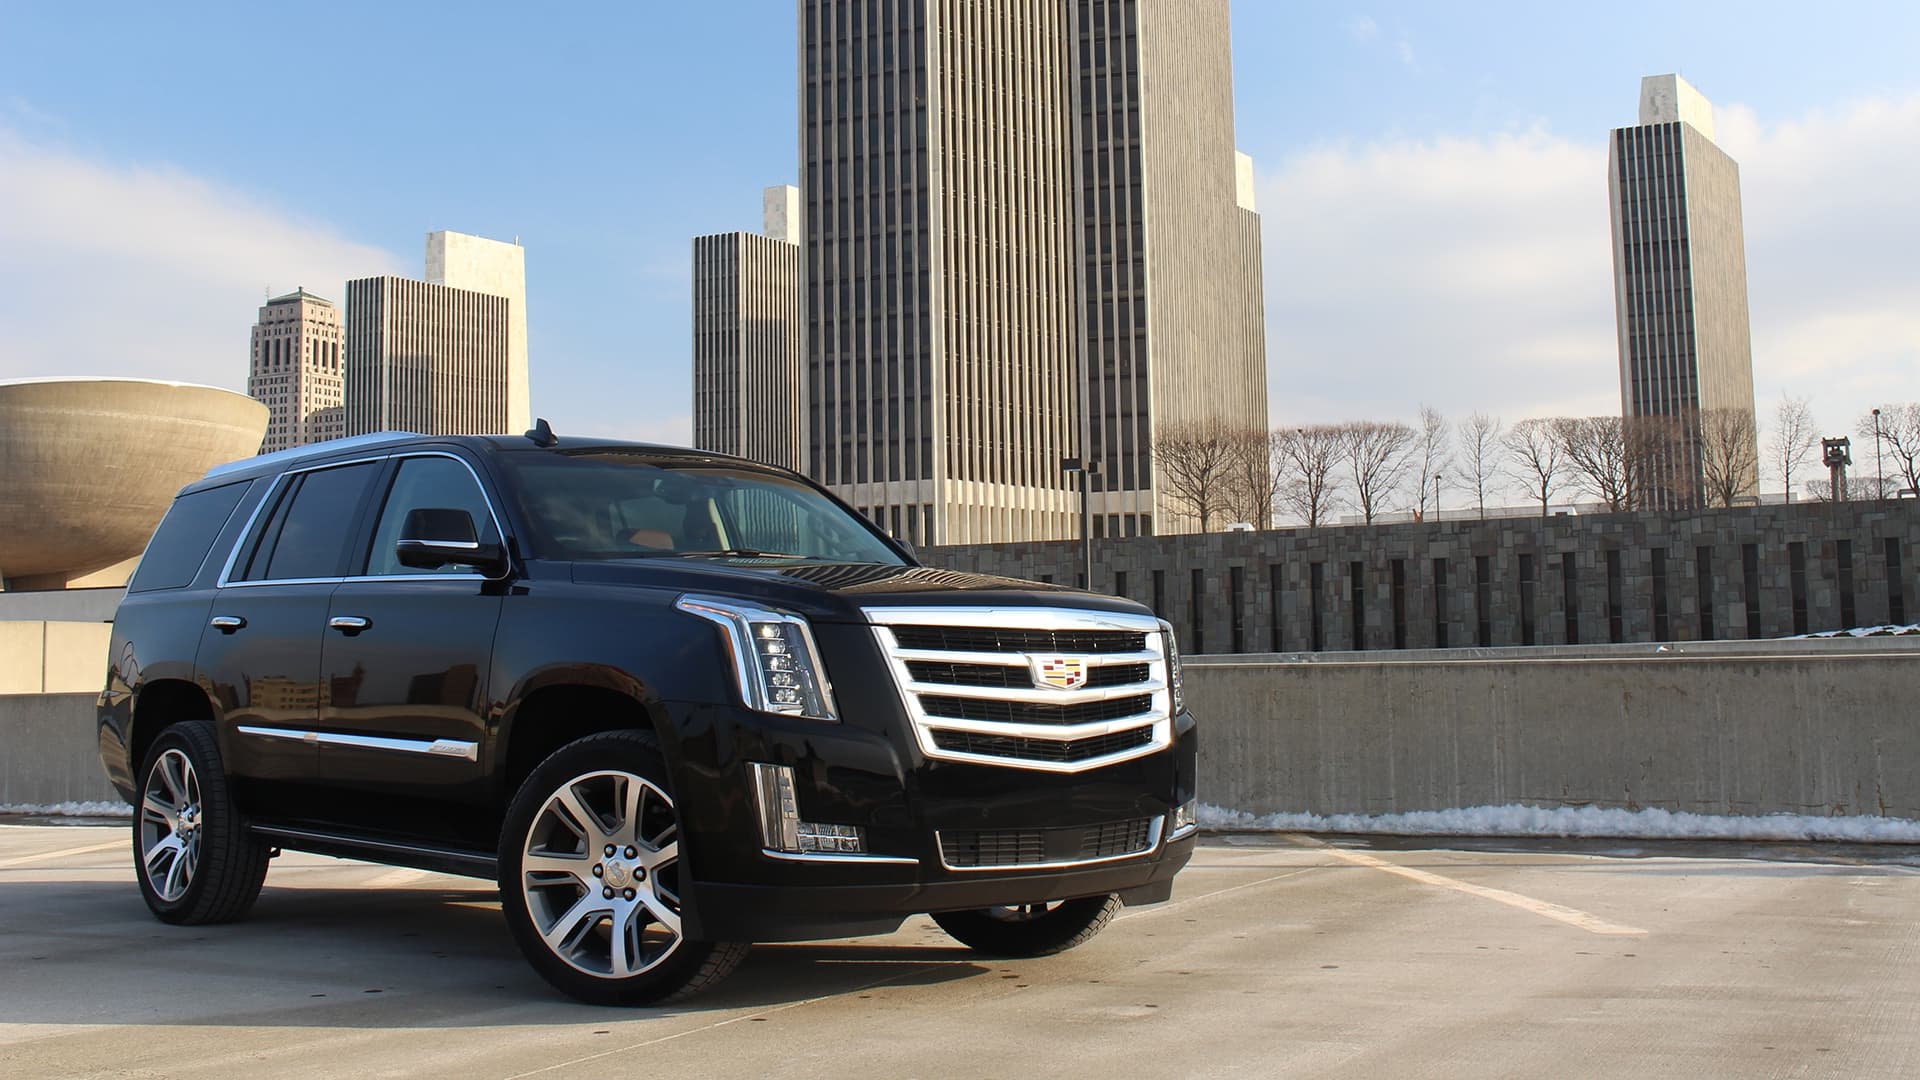 Cadillac Escalade Wallpaper Image Amp Pictures Becuo